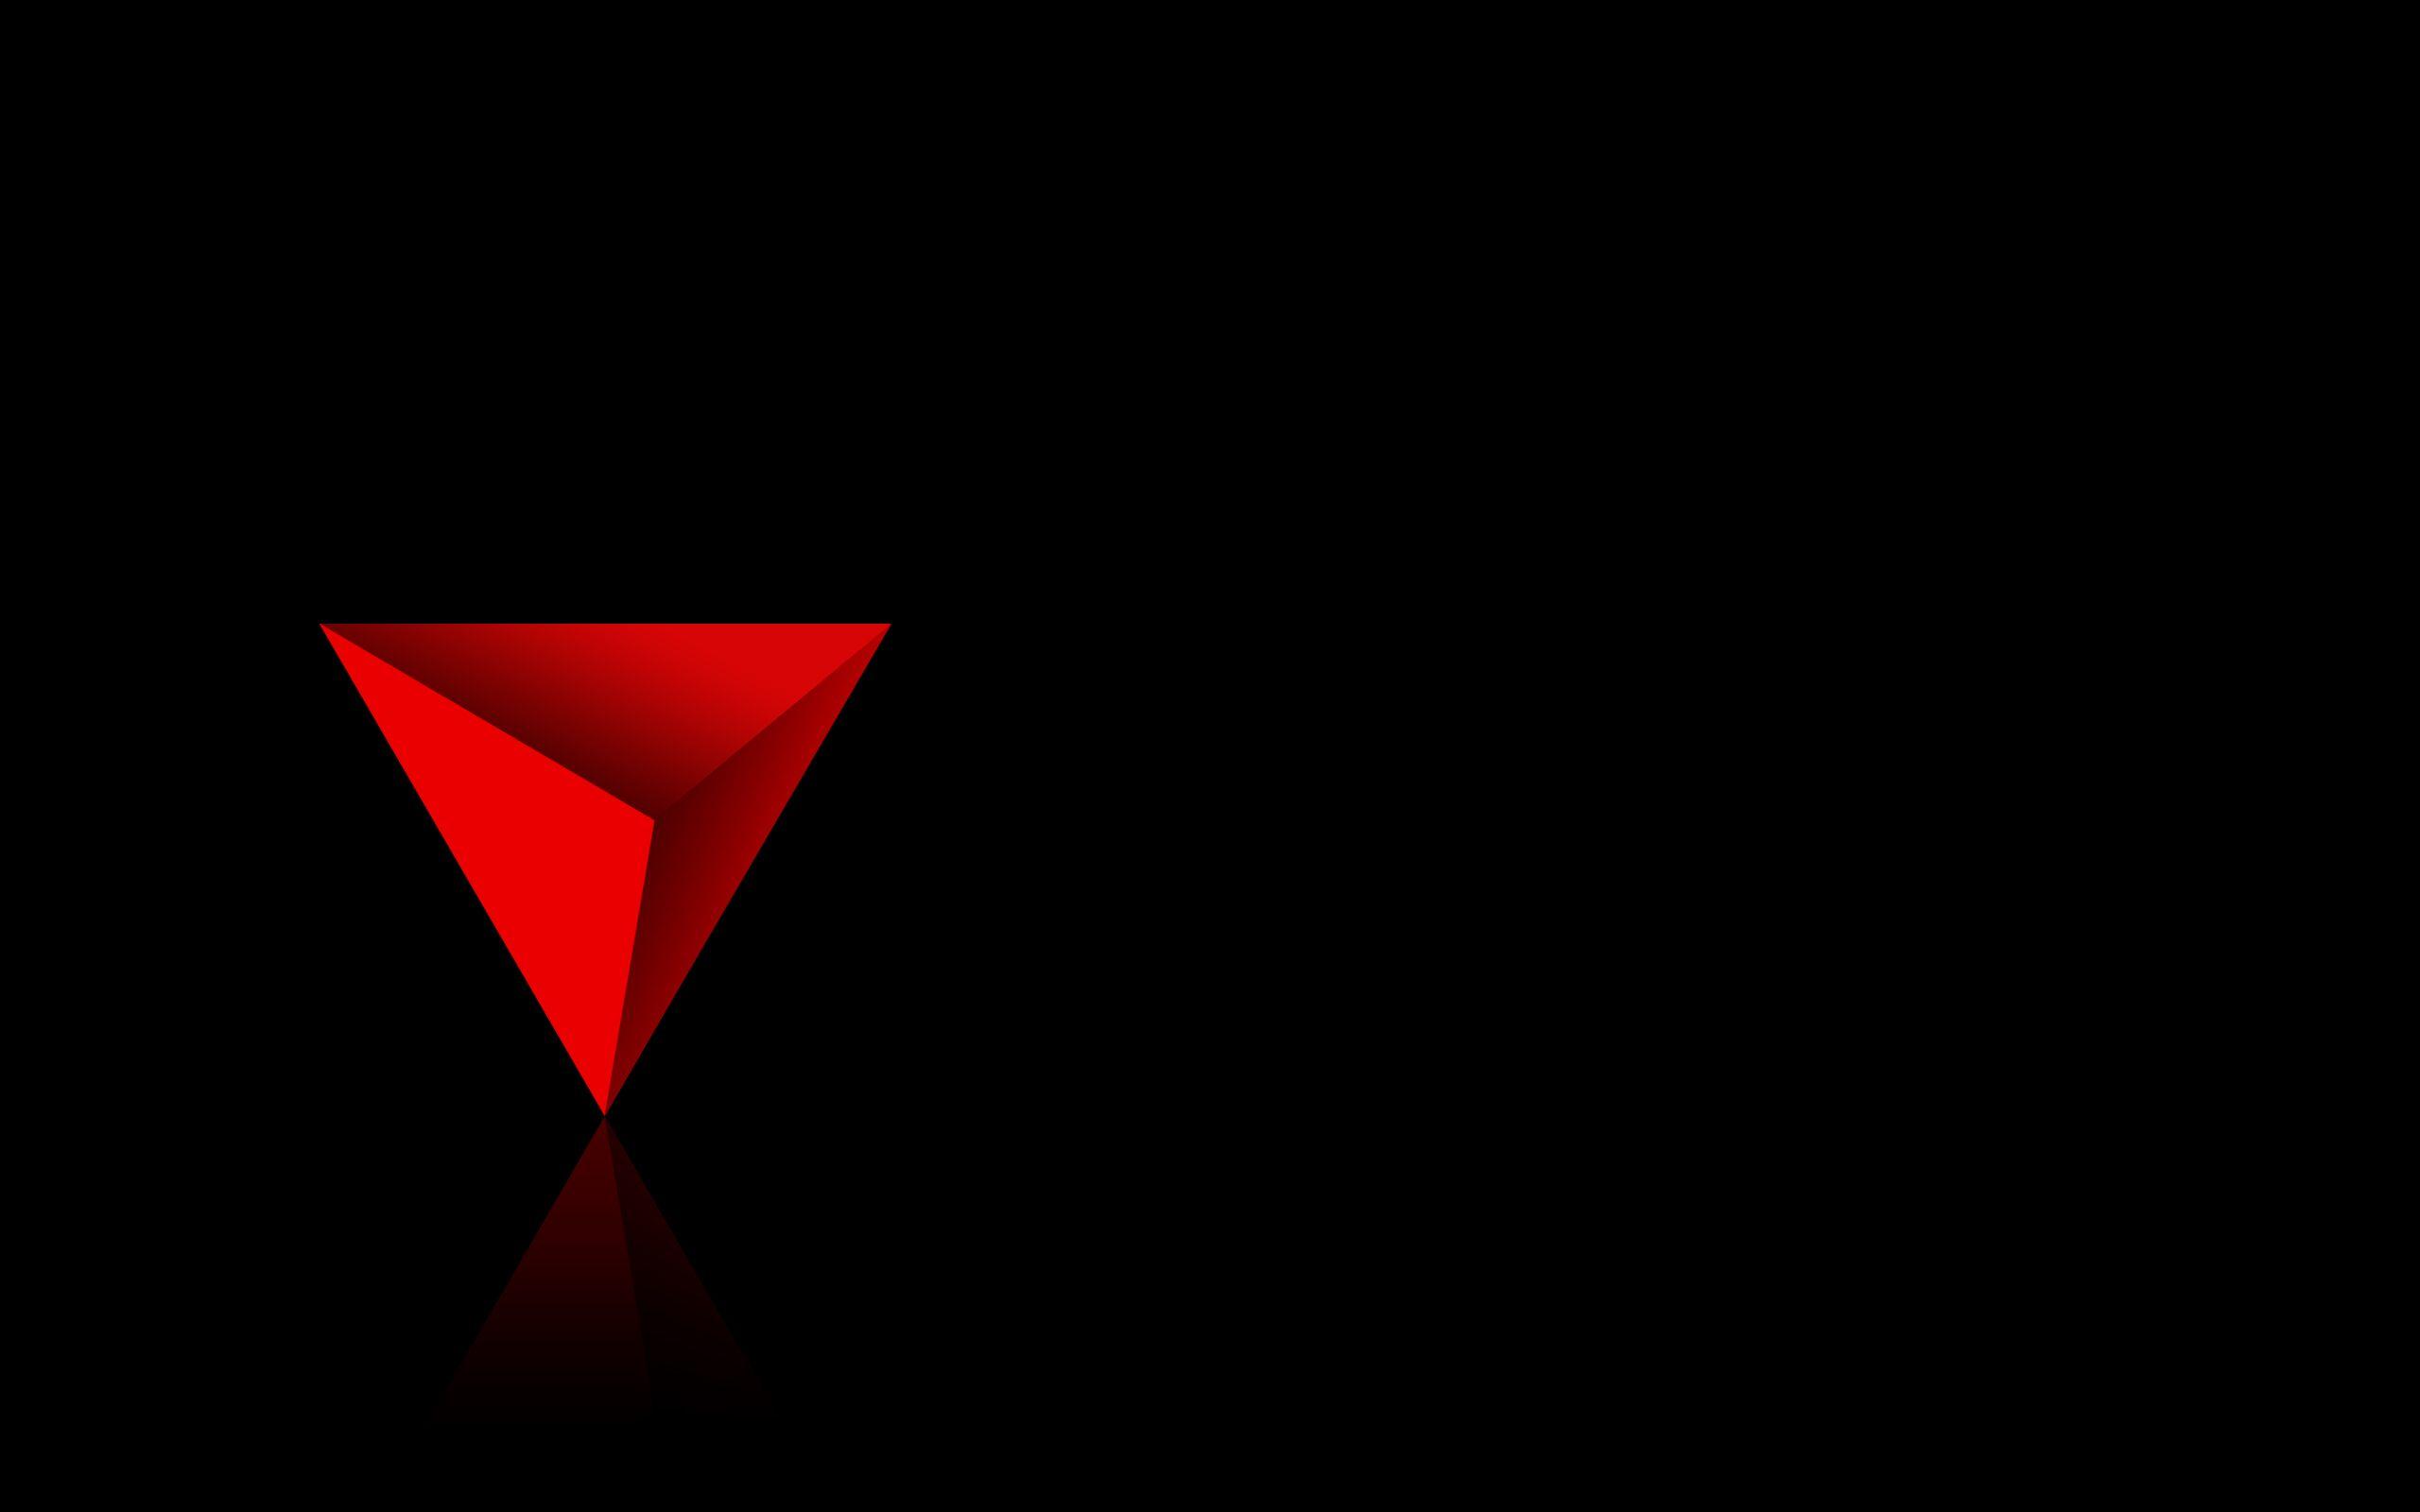 Red Triangle Wallpaper Background 8506 2560x1600